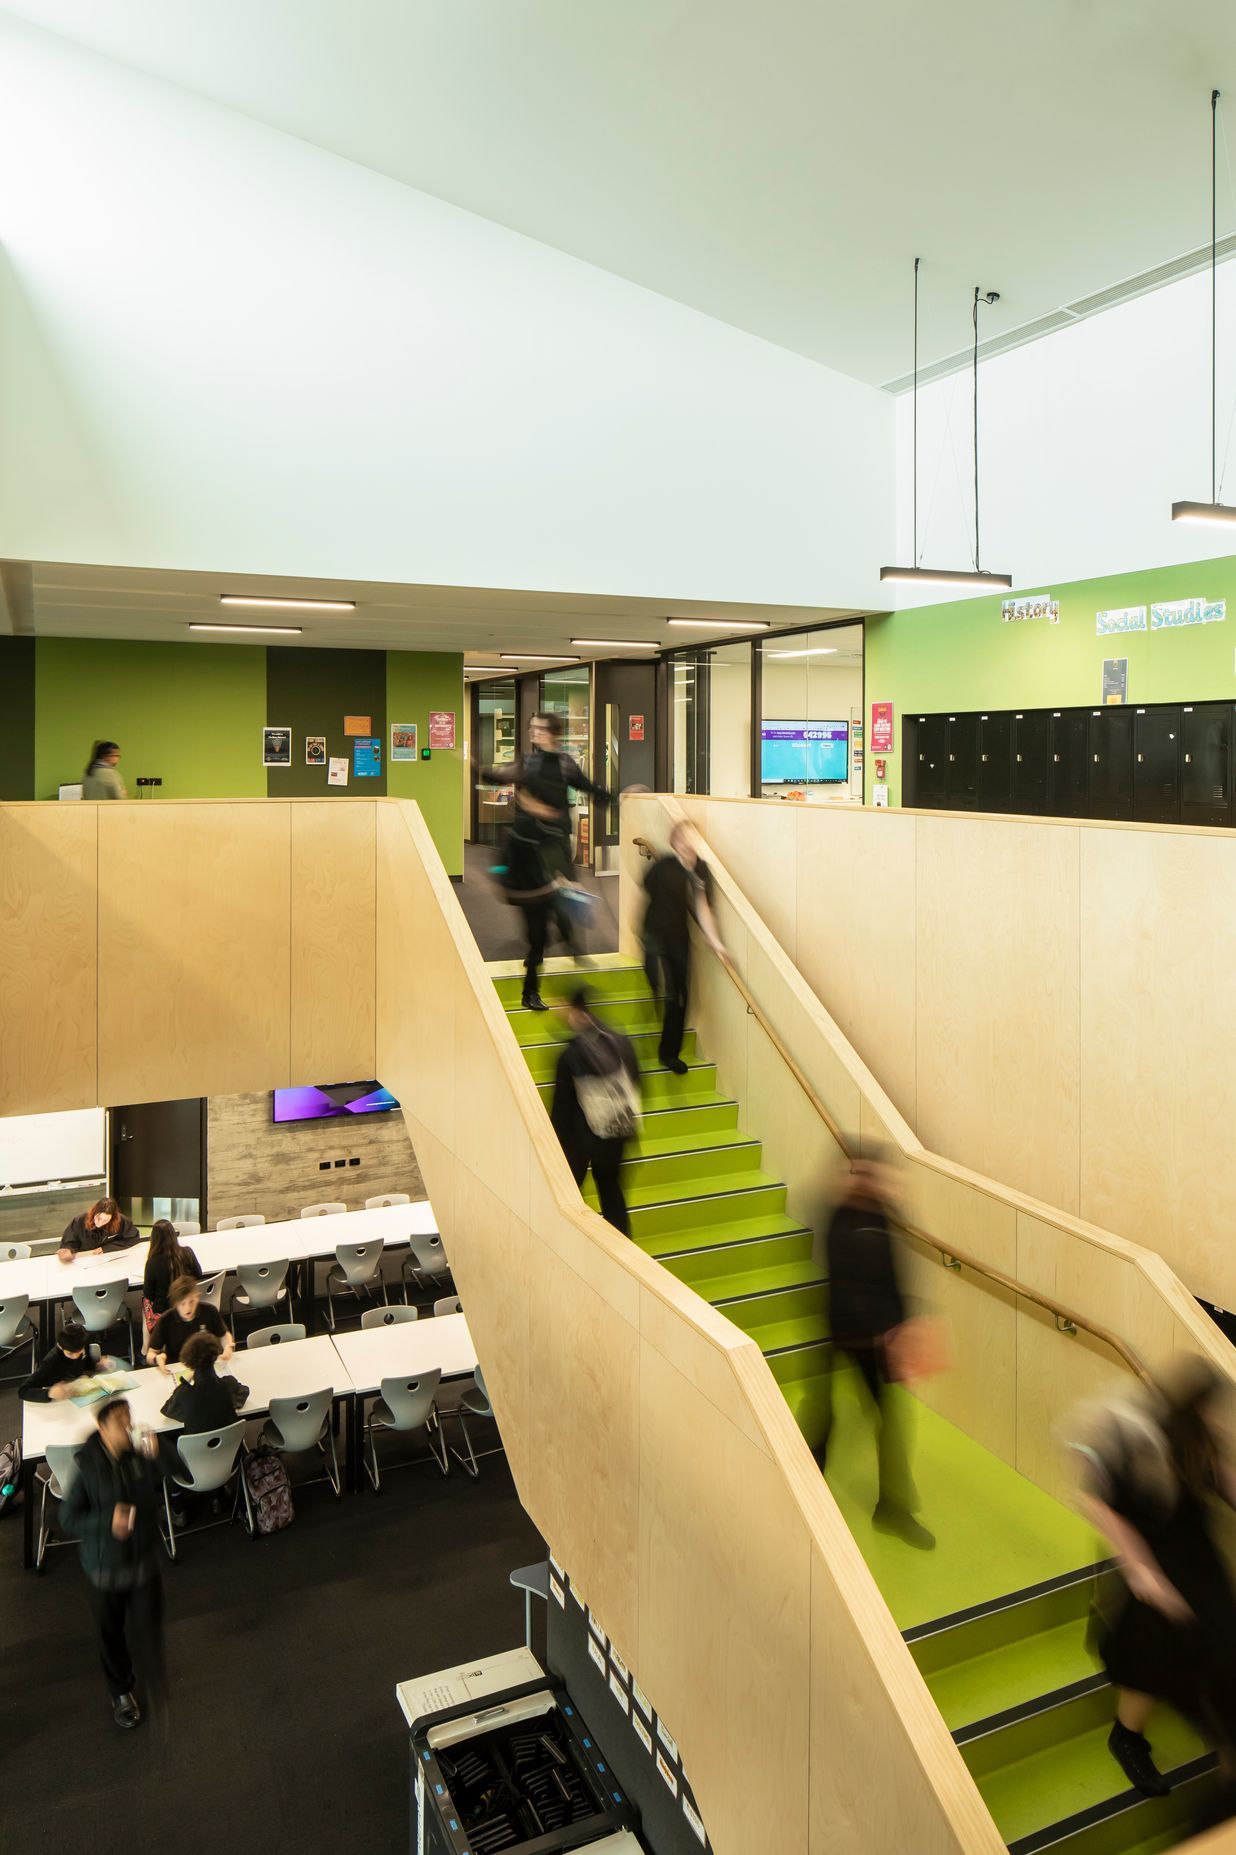 The learning hub features green wall panels and stairs.